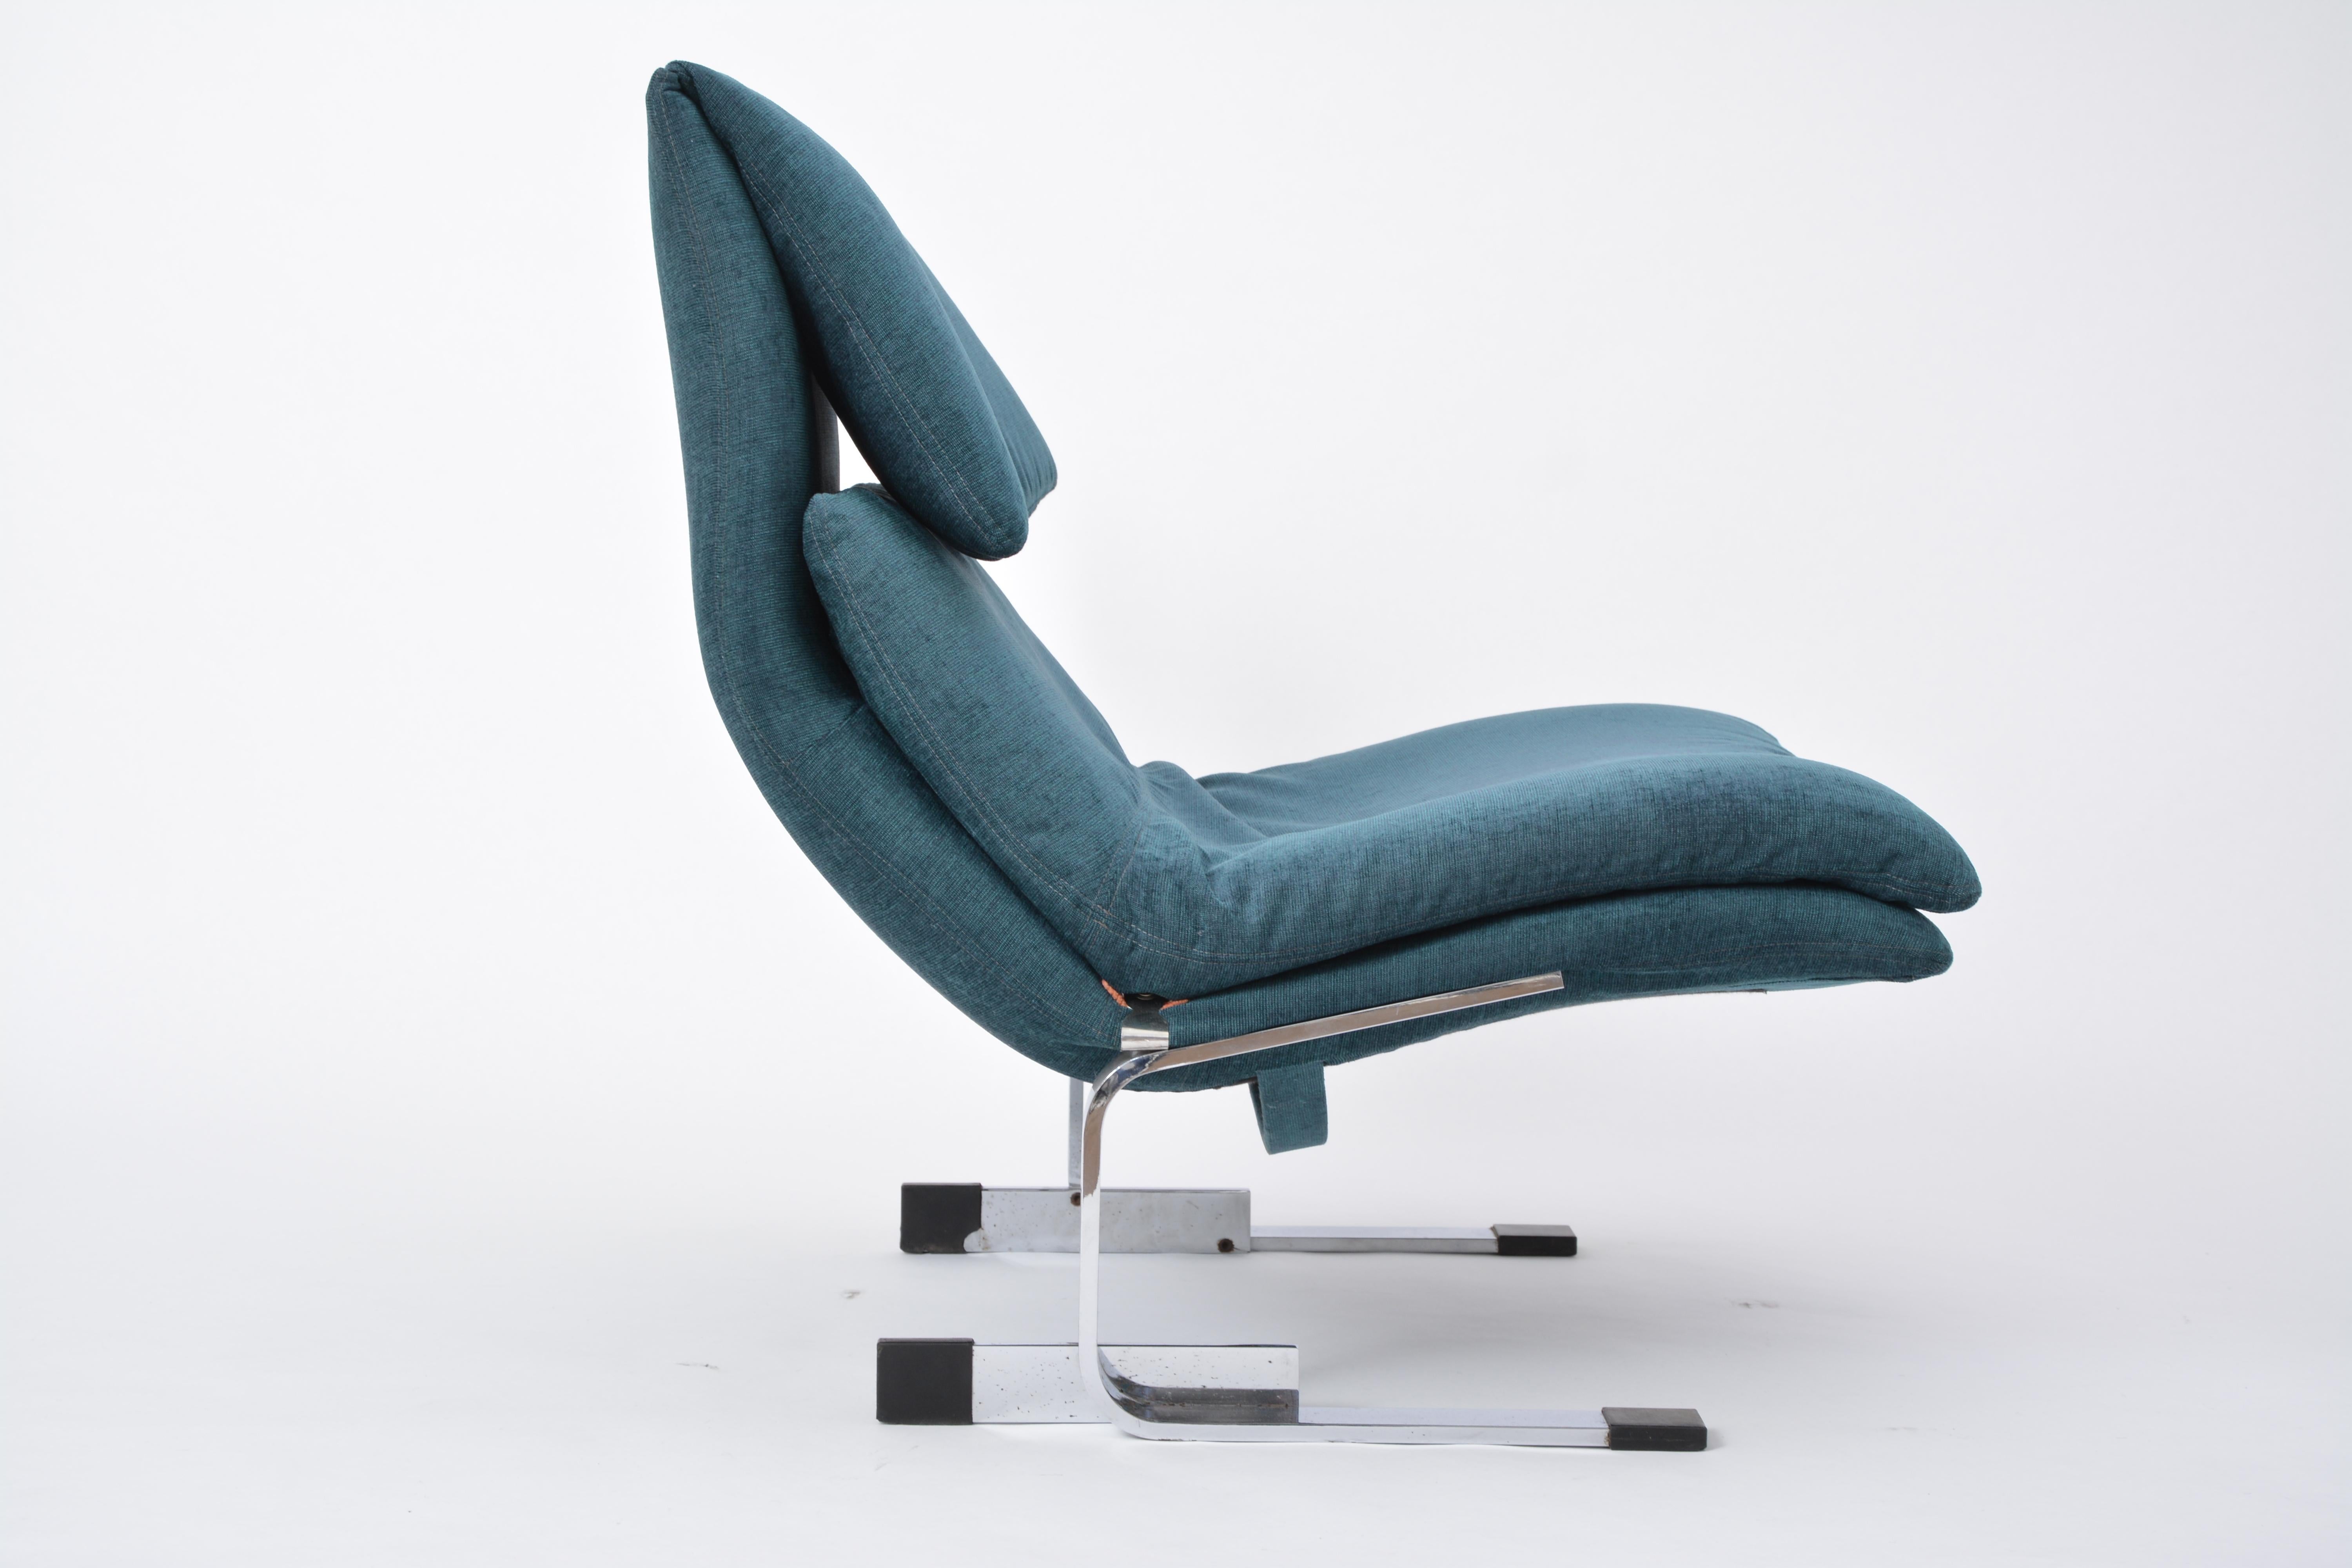 Steel Reupholstered Post Modern Onda lounge chair by Giovanni Offredi for Saporiti